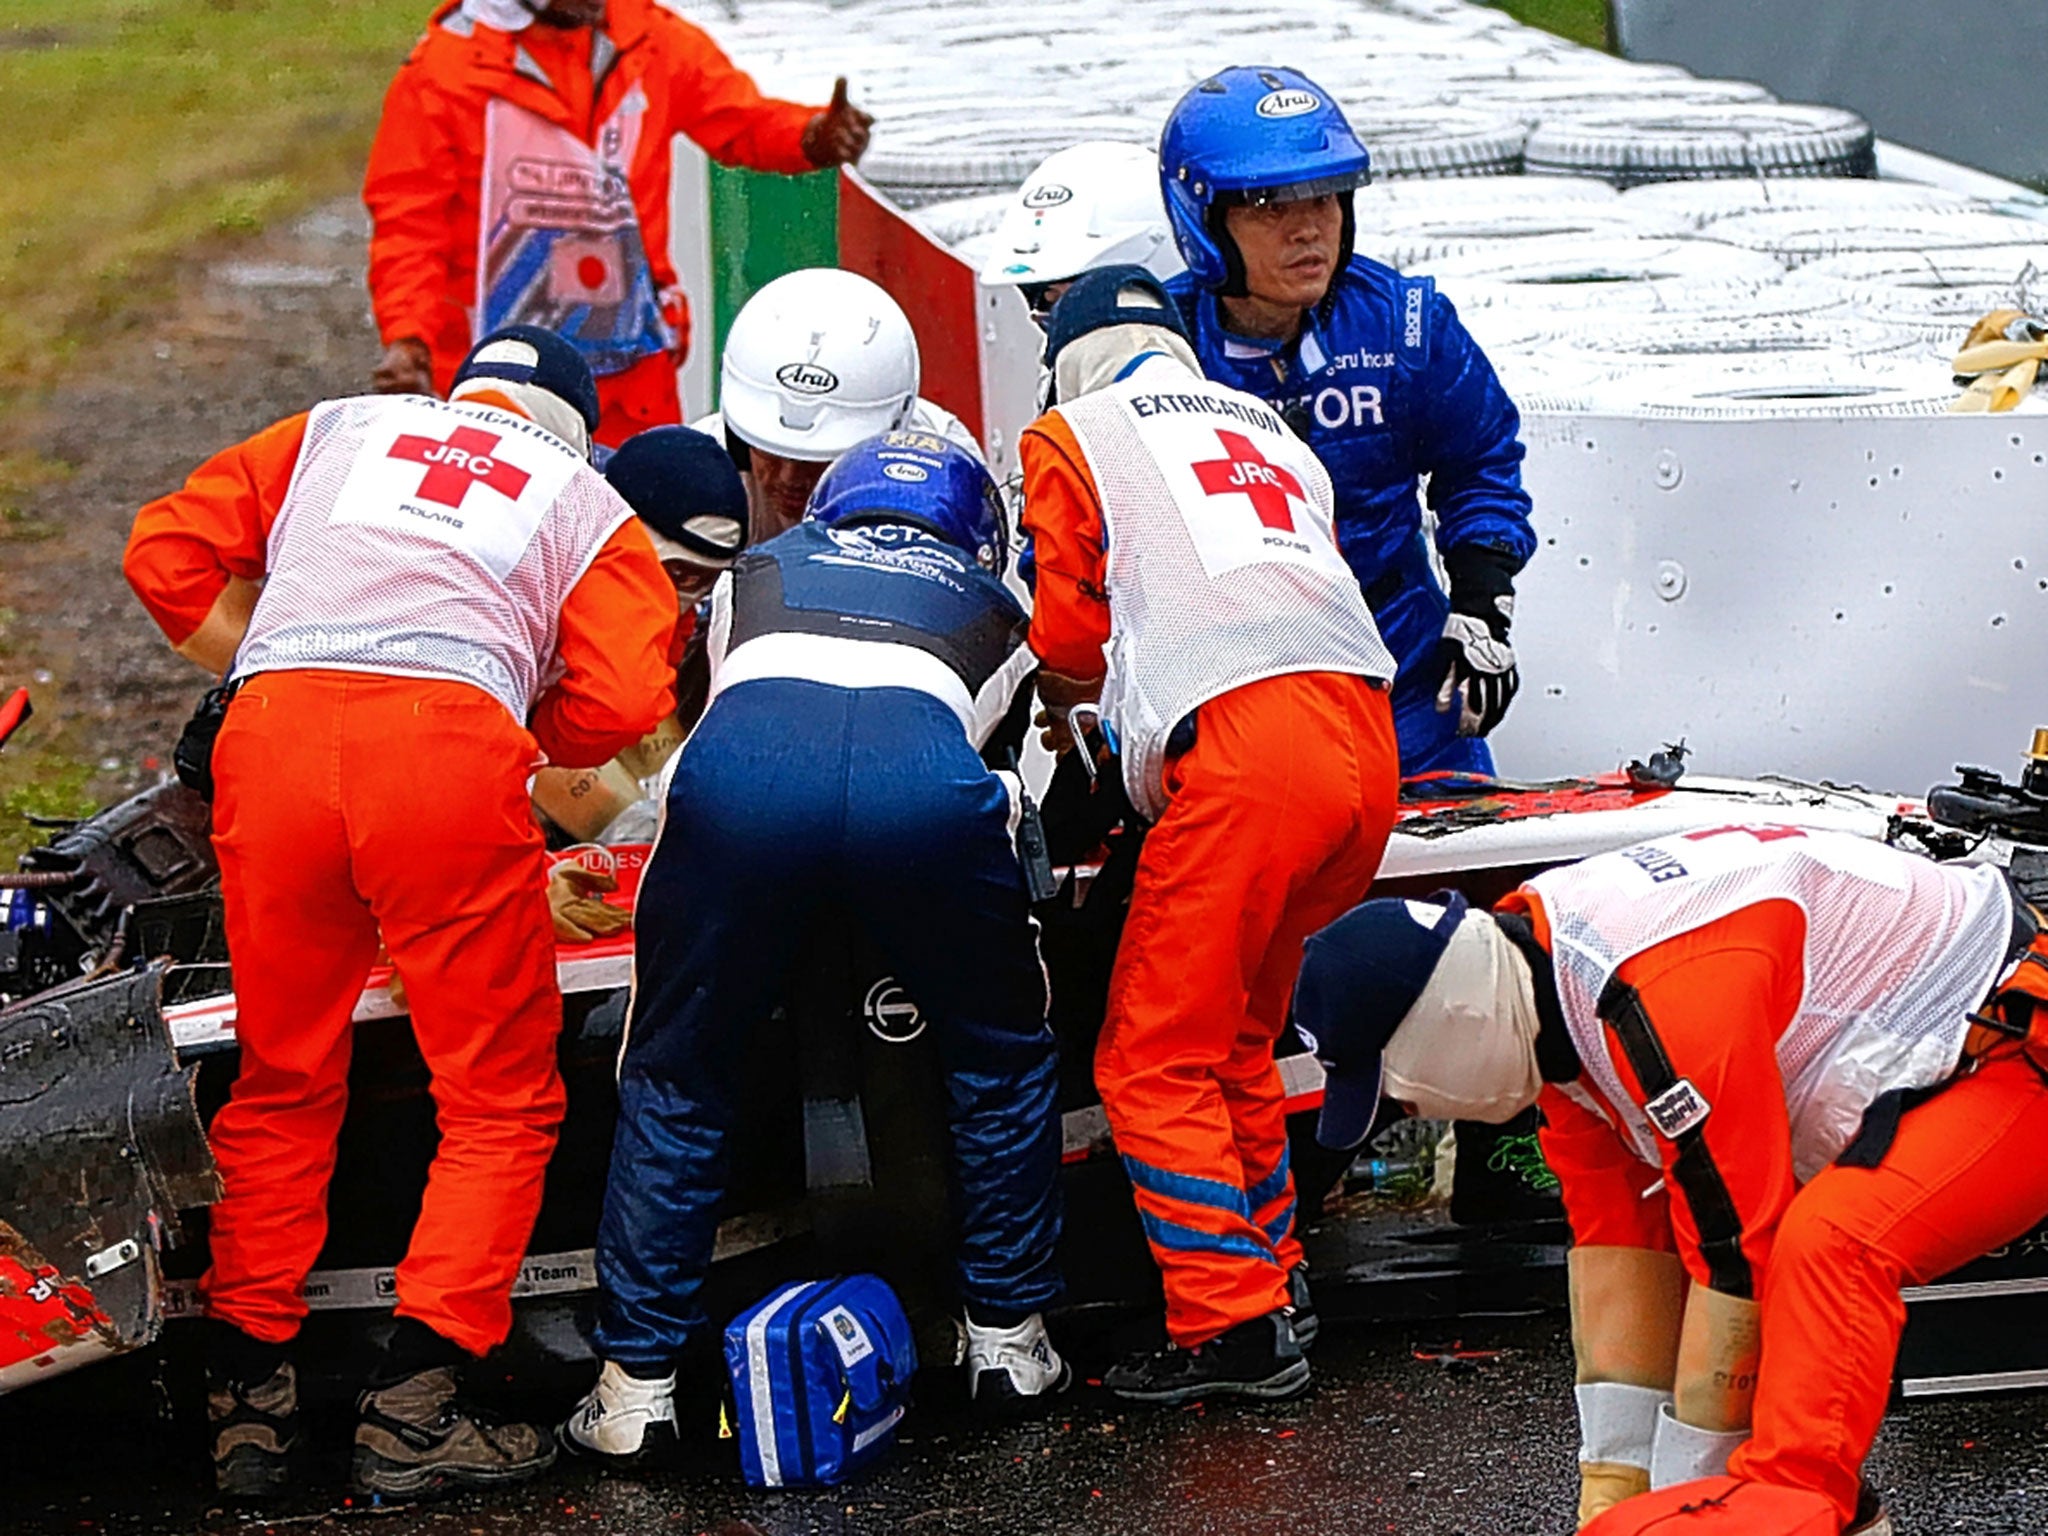 Bianchi is tended to in his car following the crash at Suzuka on Sunday